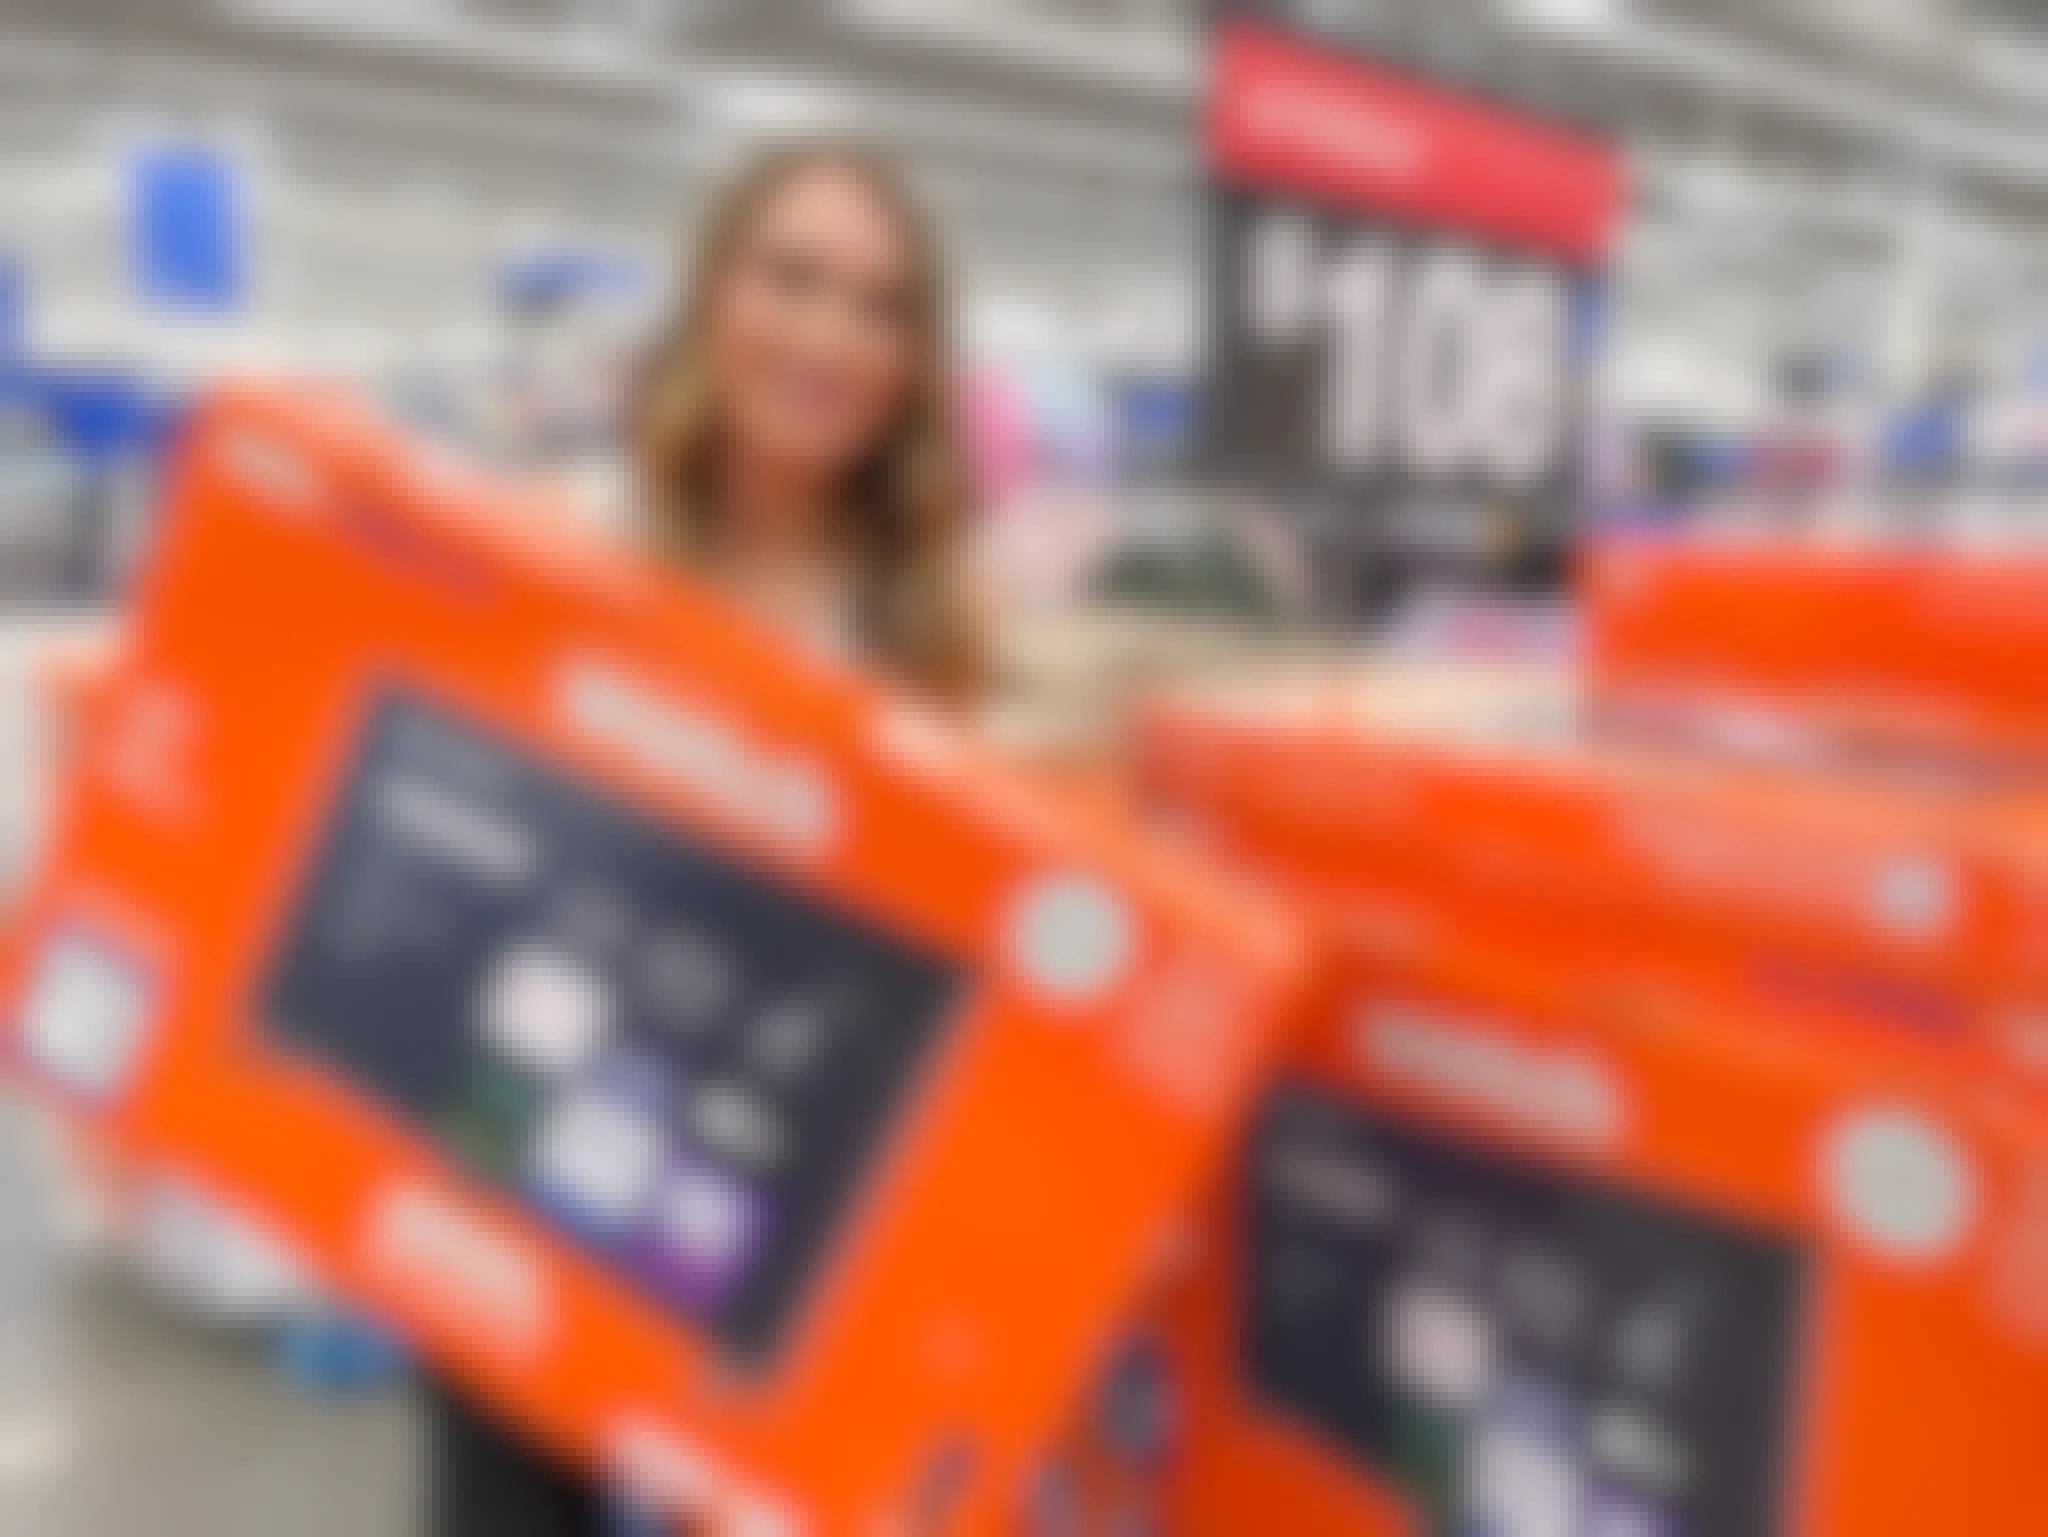 a woman holding an Onn smart TV next to an Onn TV display with a $108 sale price sign